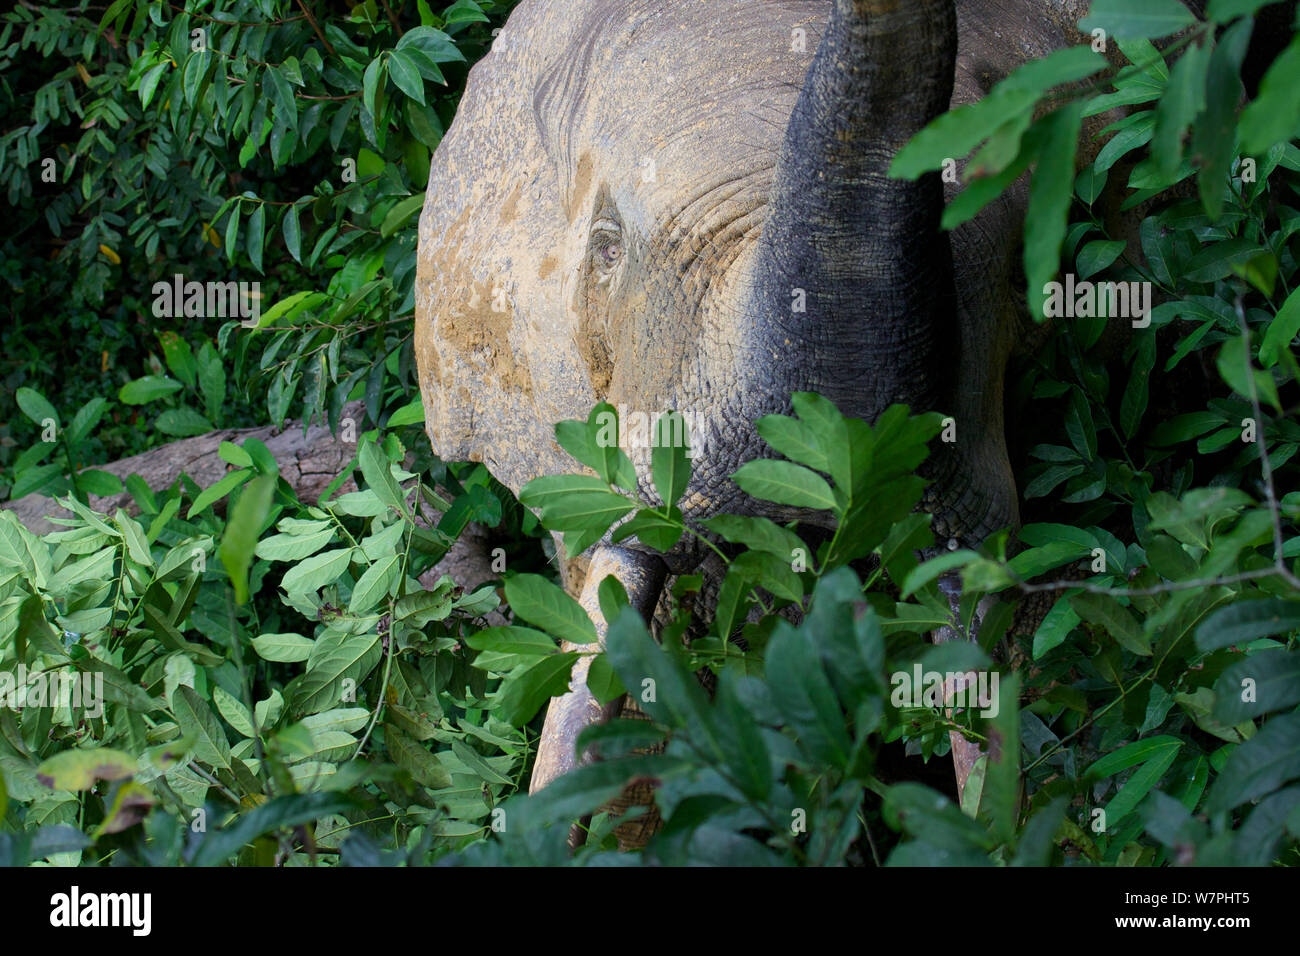 Forest elephant, (Loxodonta cyclotis) in forest around Dzanga Bai Clearing, Central African Republic, Africa. Stock Photo